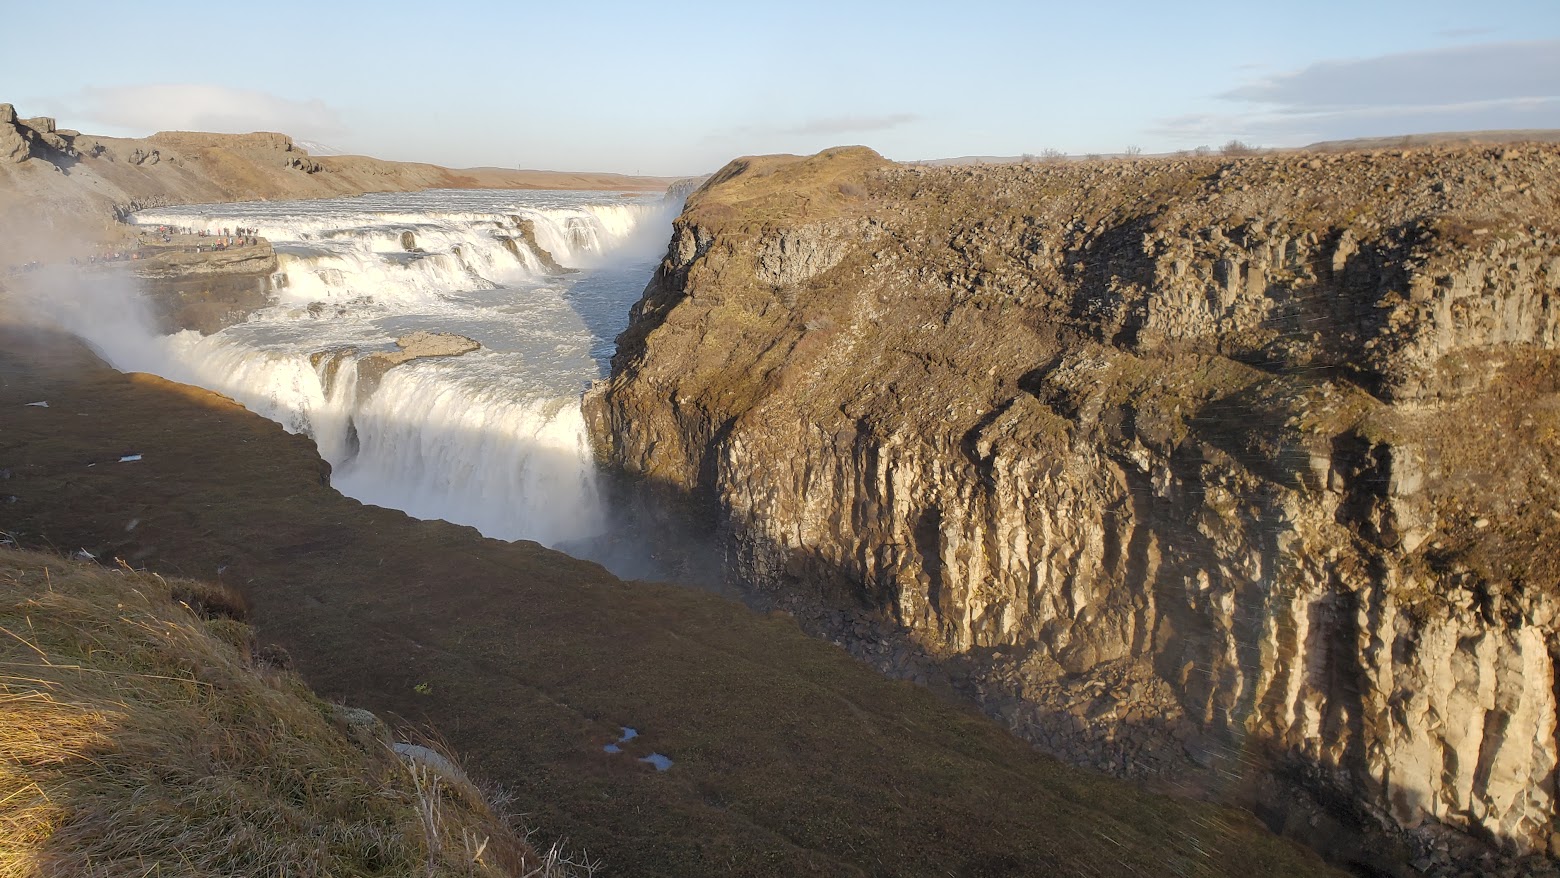 Golden Circle Highlights, Iceland: Gullfoss, or Golden Falls, unique as the waterfall plunges into a gorge so it seems to disappear into the earth